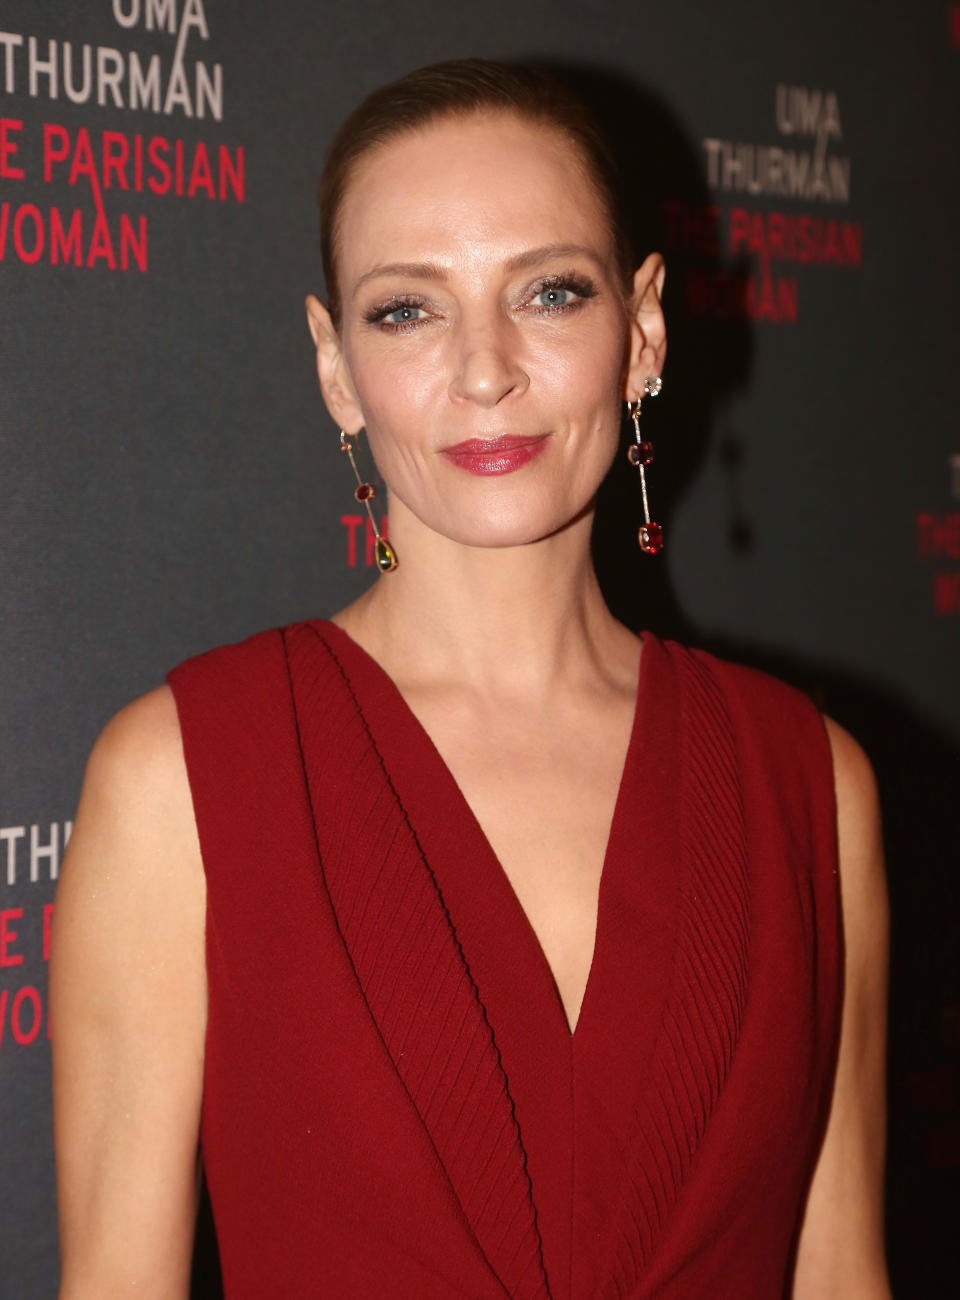 Uma Thurman has expressed guilt at not speaking up sooner about Harvey Weinstein. (Photo: Getty Images)